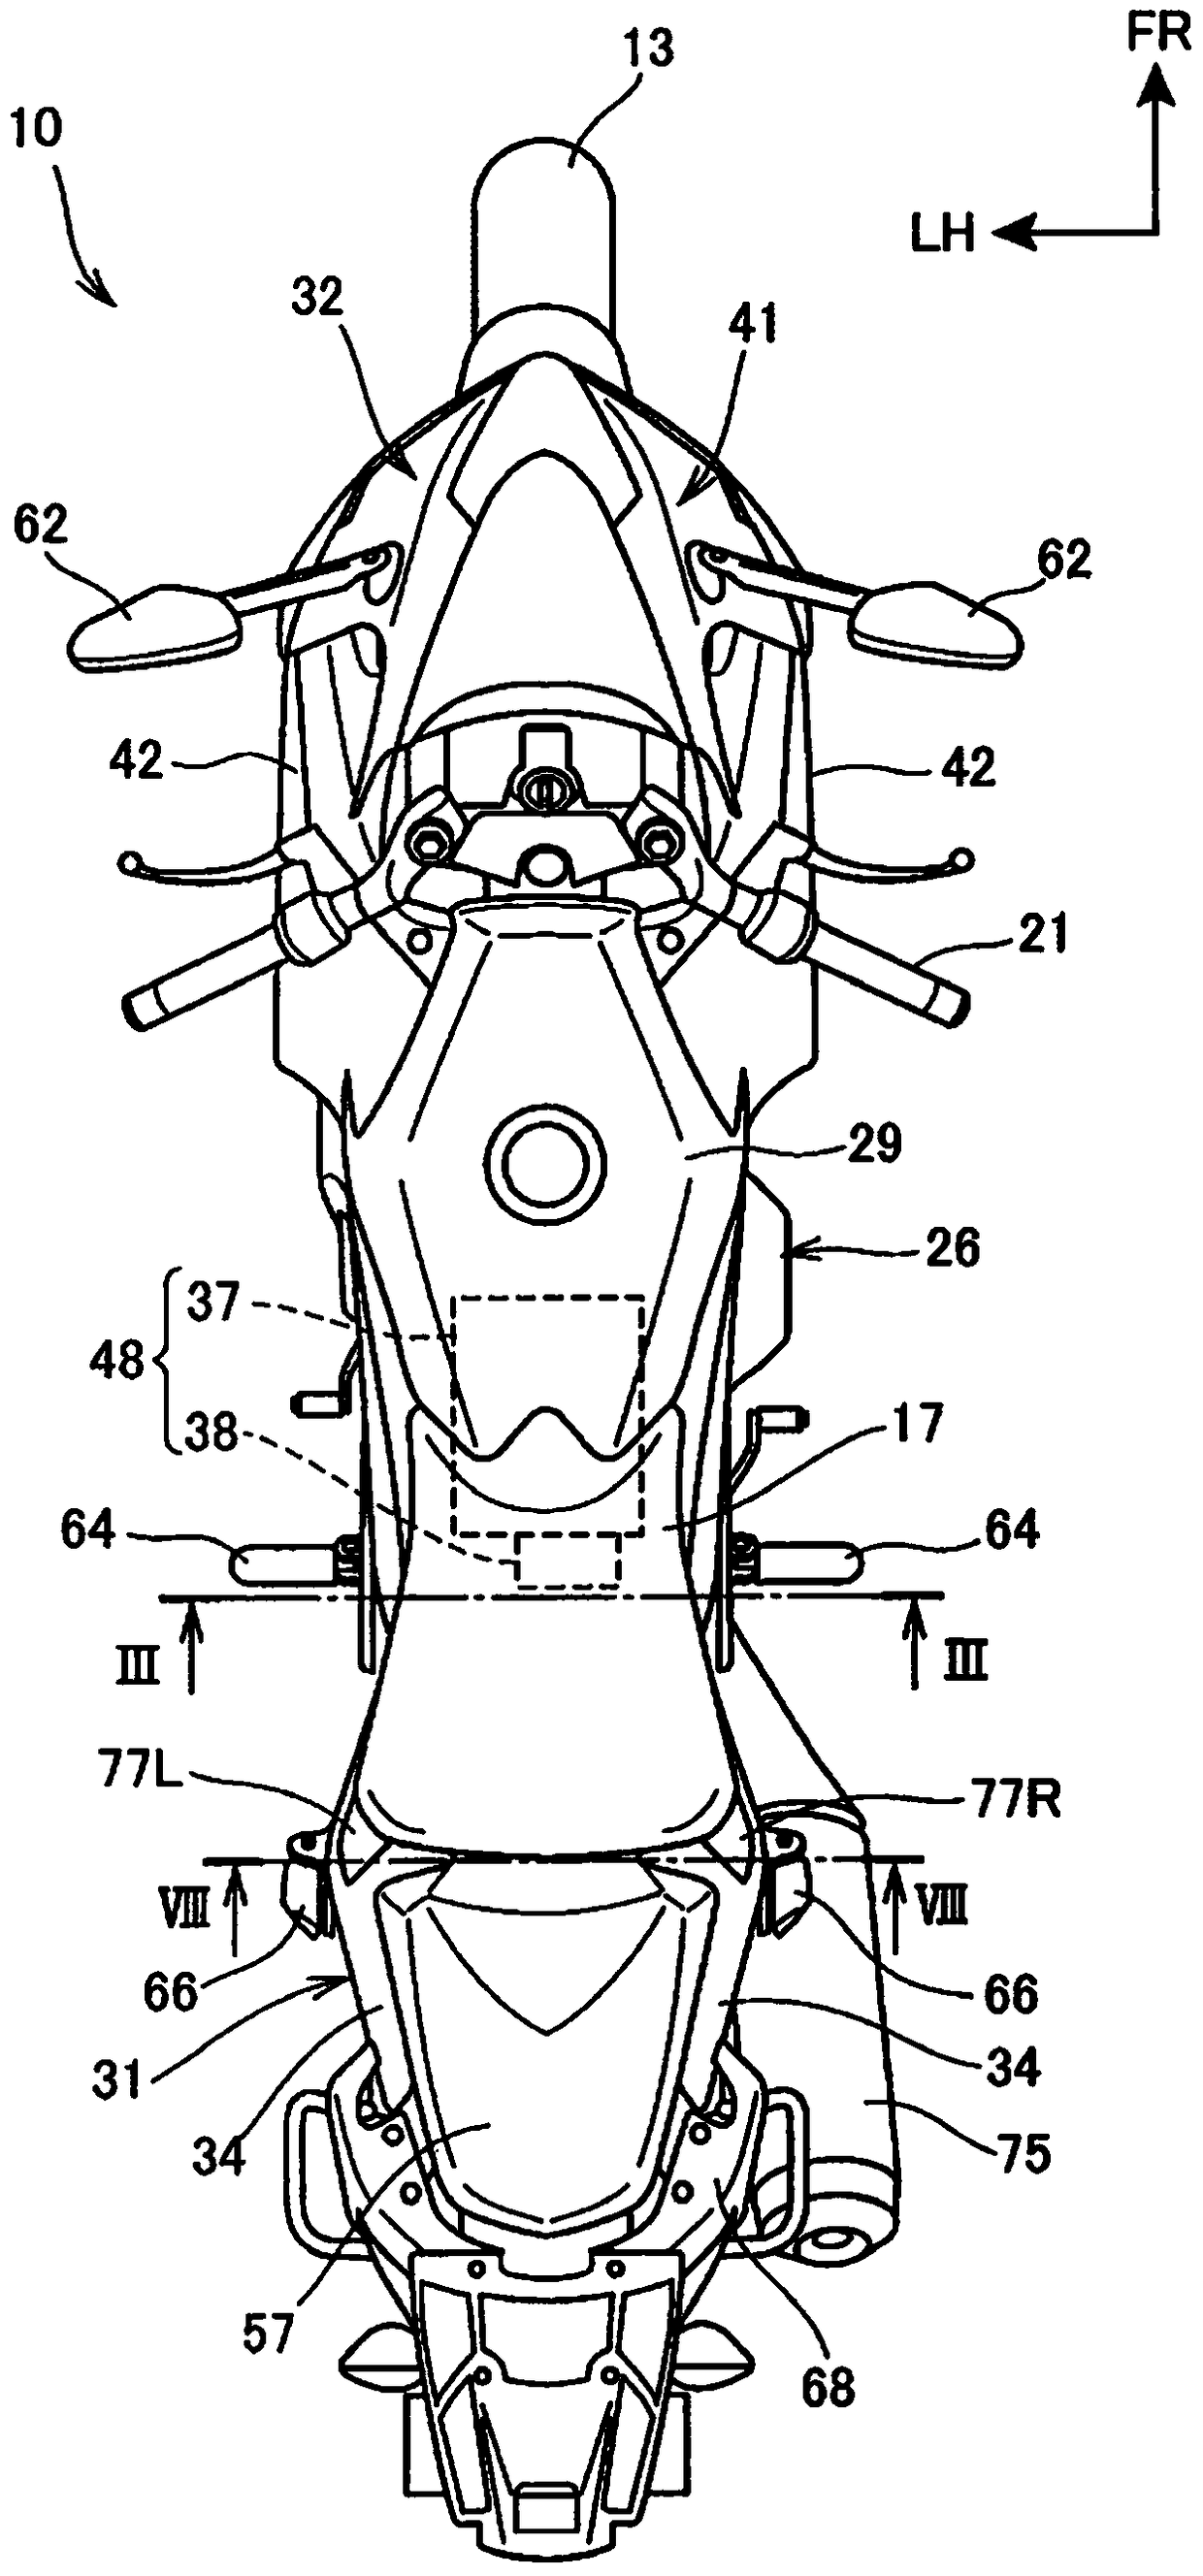 Air intake structure of saddle-riding vehicle